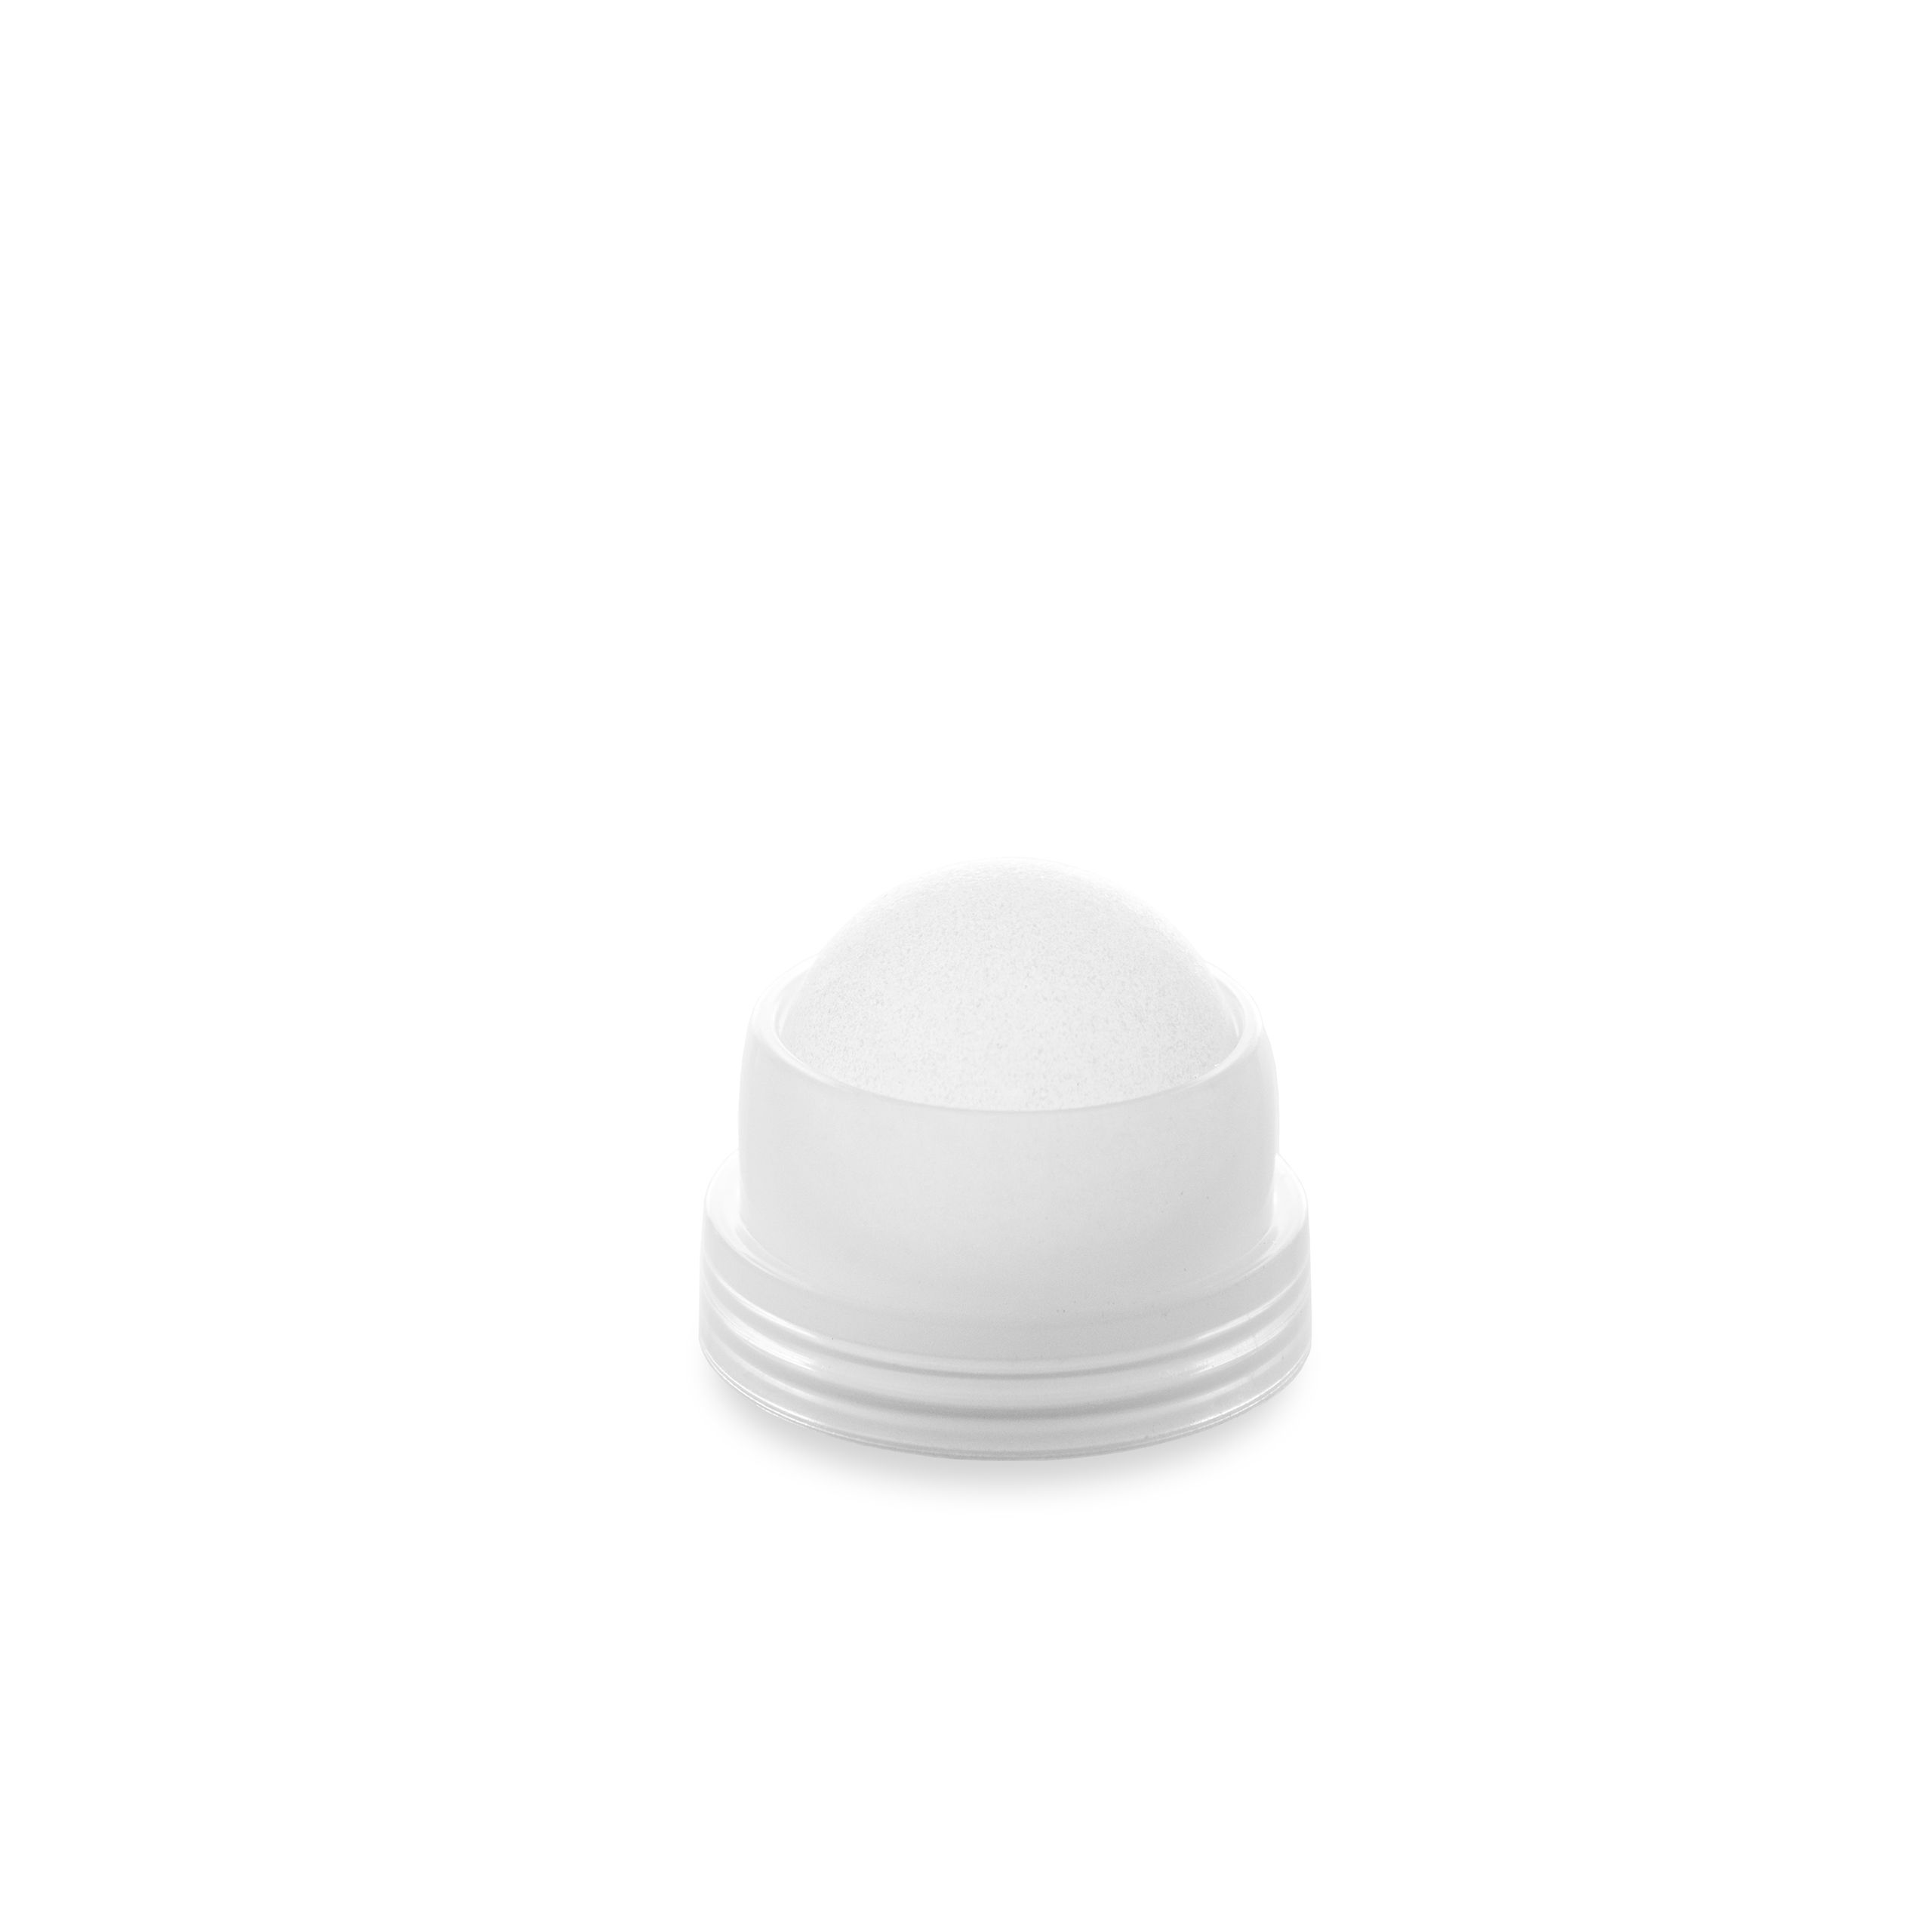 Roll-on ball base diameter 24 compatible with a 30 ml glass bottle